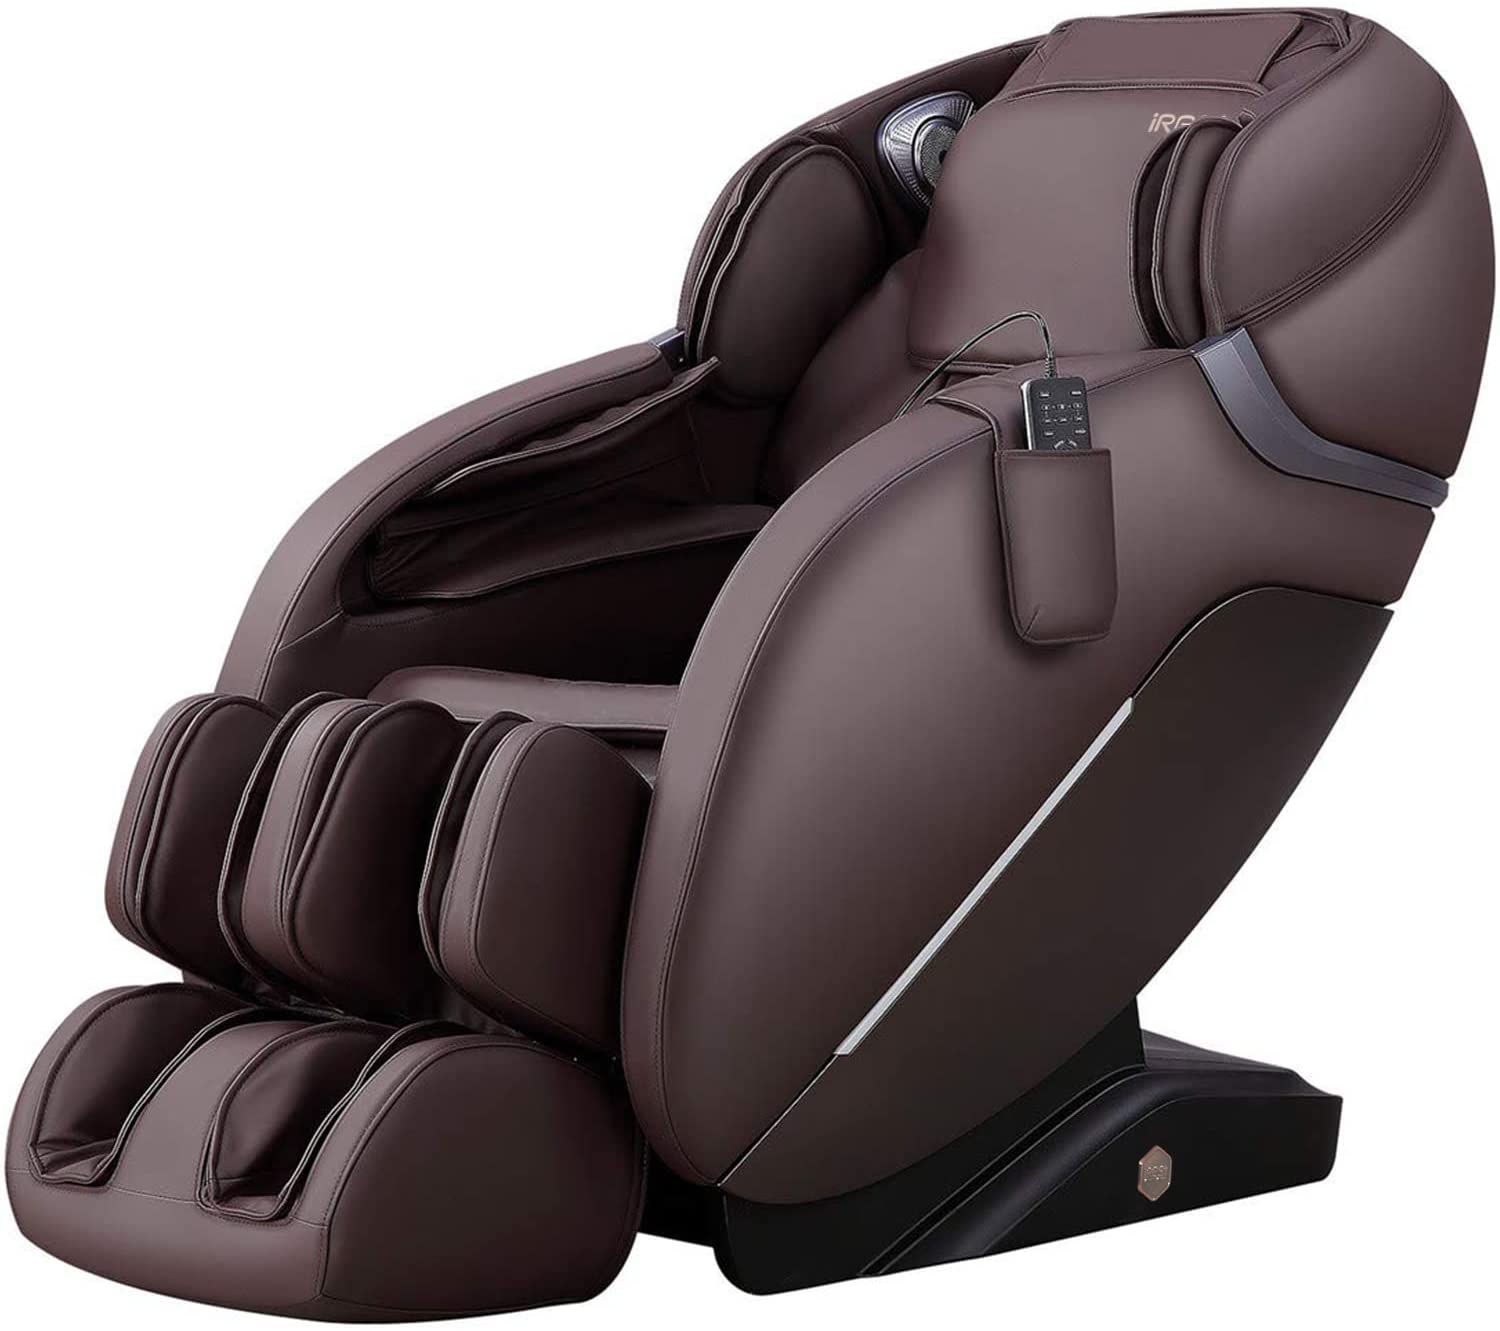 <strong>iRest SL Track Massage Chair Recliner</strong>